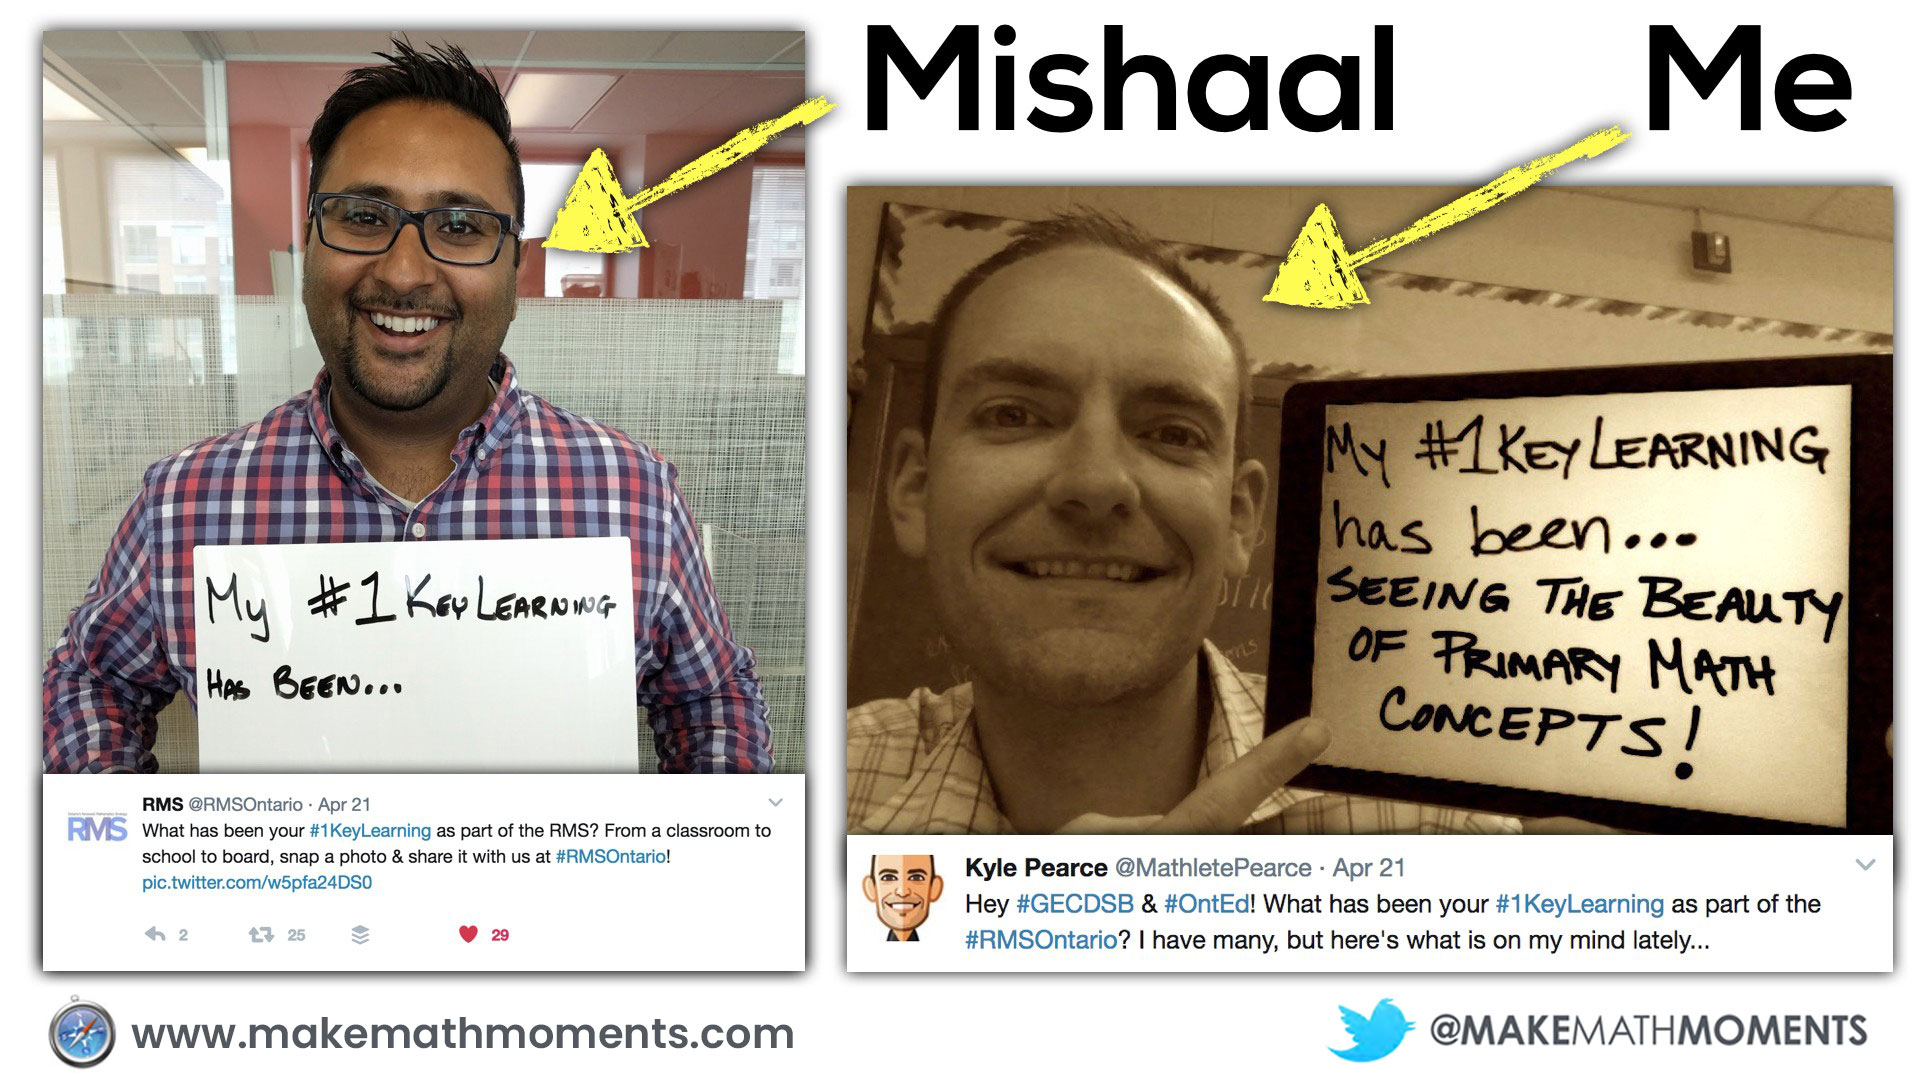 Mishaal and Kyle - #1KeyLearning